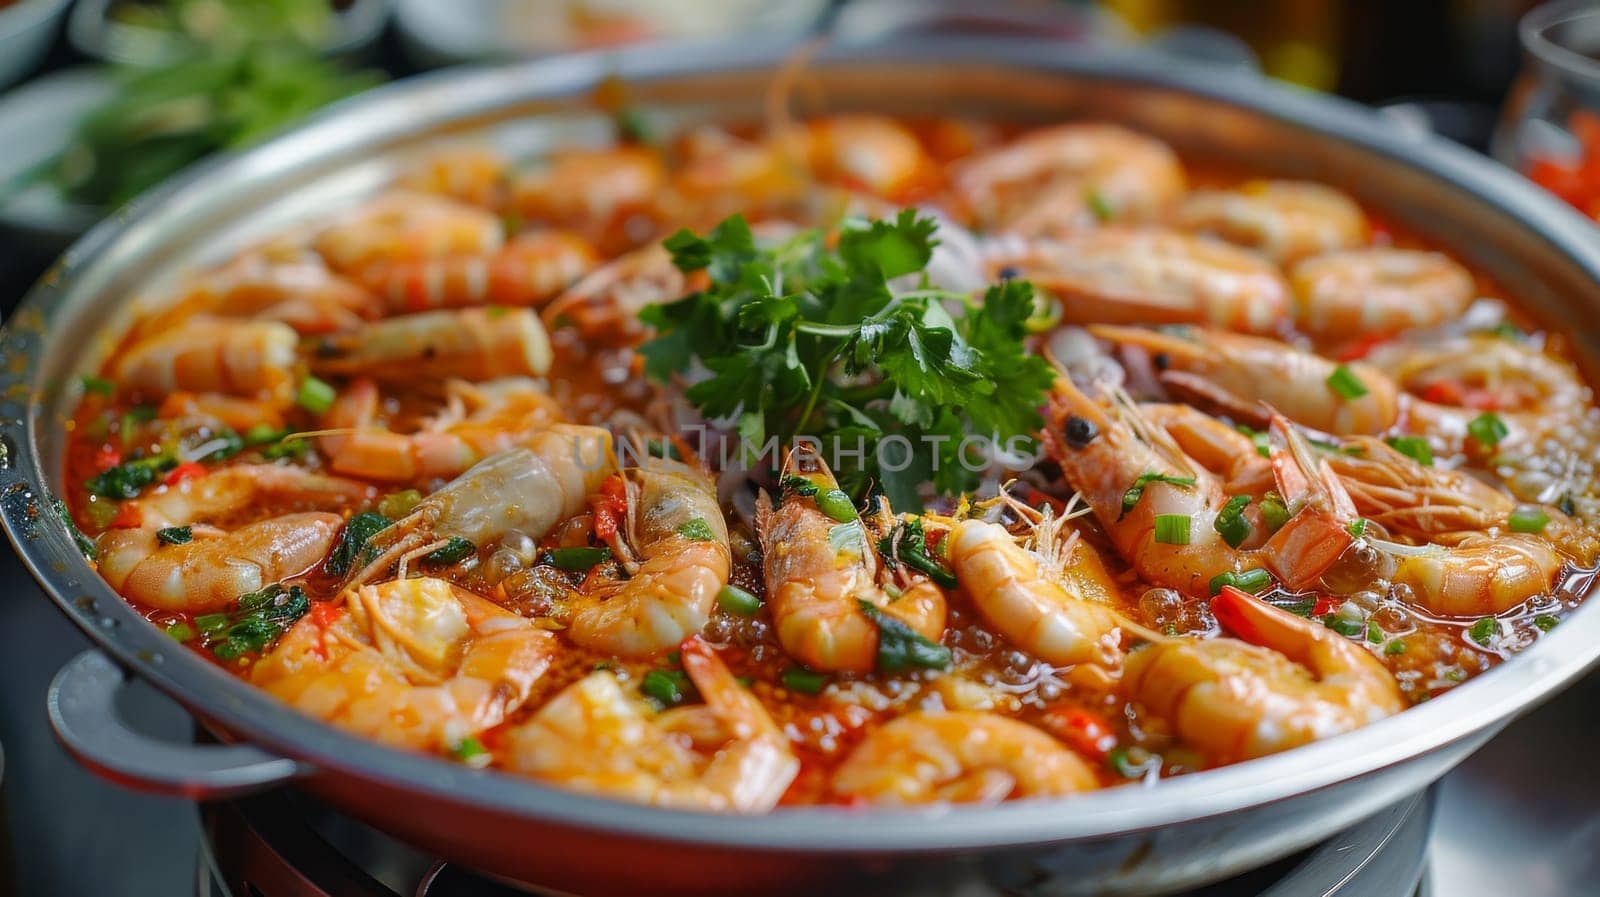 A large bowl of shrimp and vegetables is served in a silver pan. The dish is full of shrimp and vegetables, with a variety of colors and textures. The presentation is appetizing and inviting